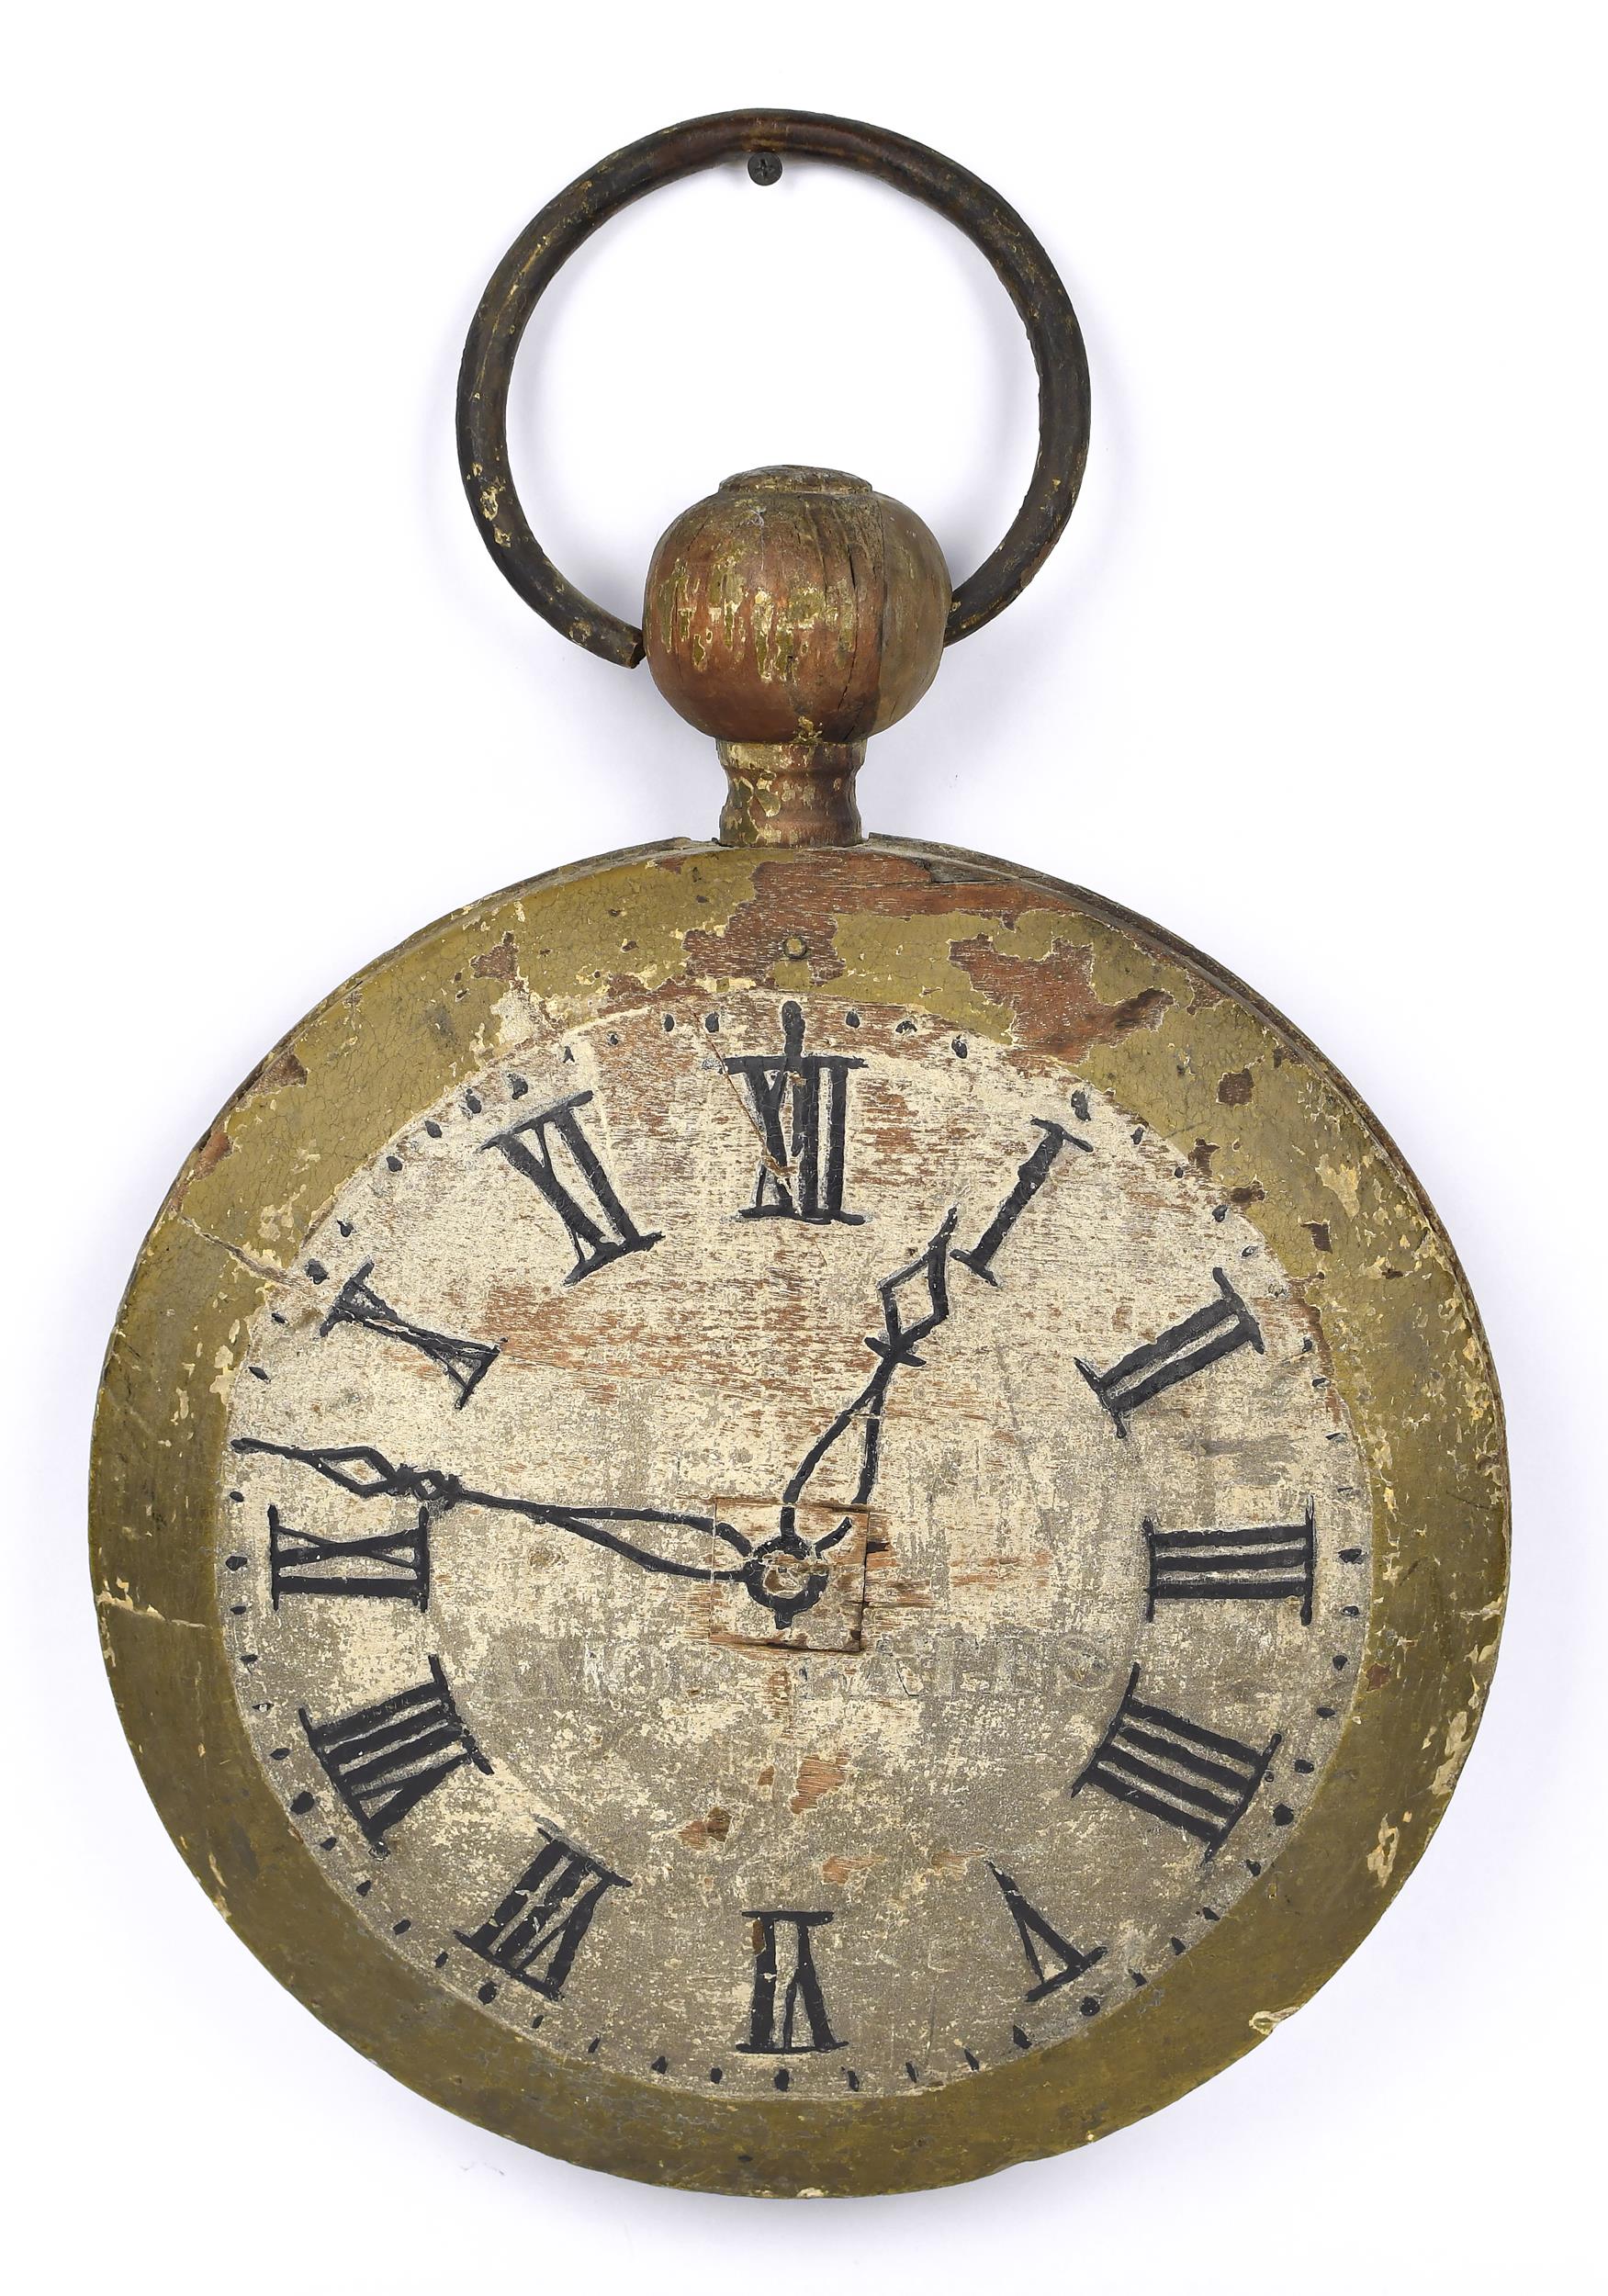 19TH C. WATCH MAKERS TRADE SIGN.